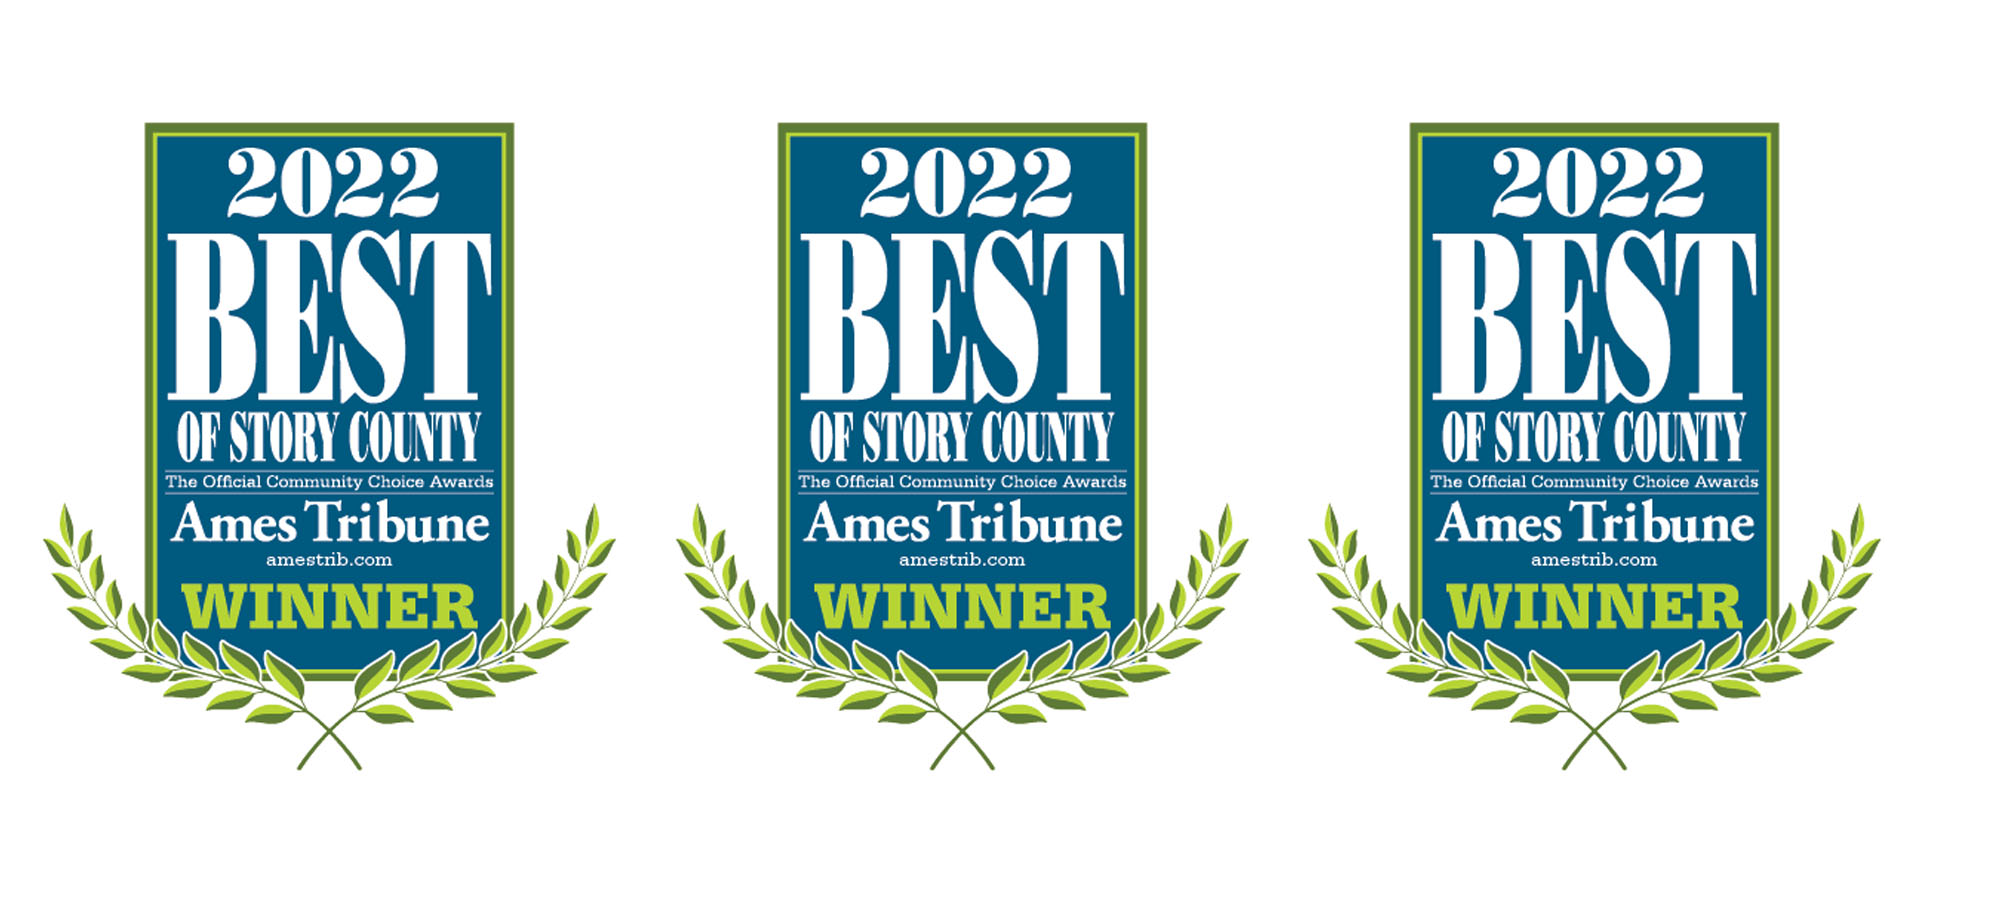 Best of Story County 2022